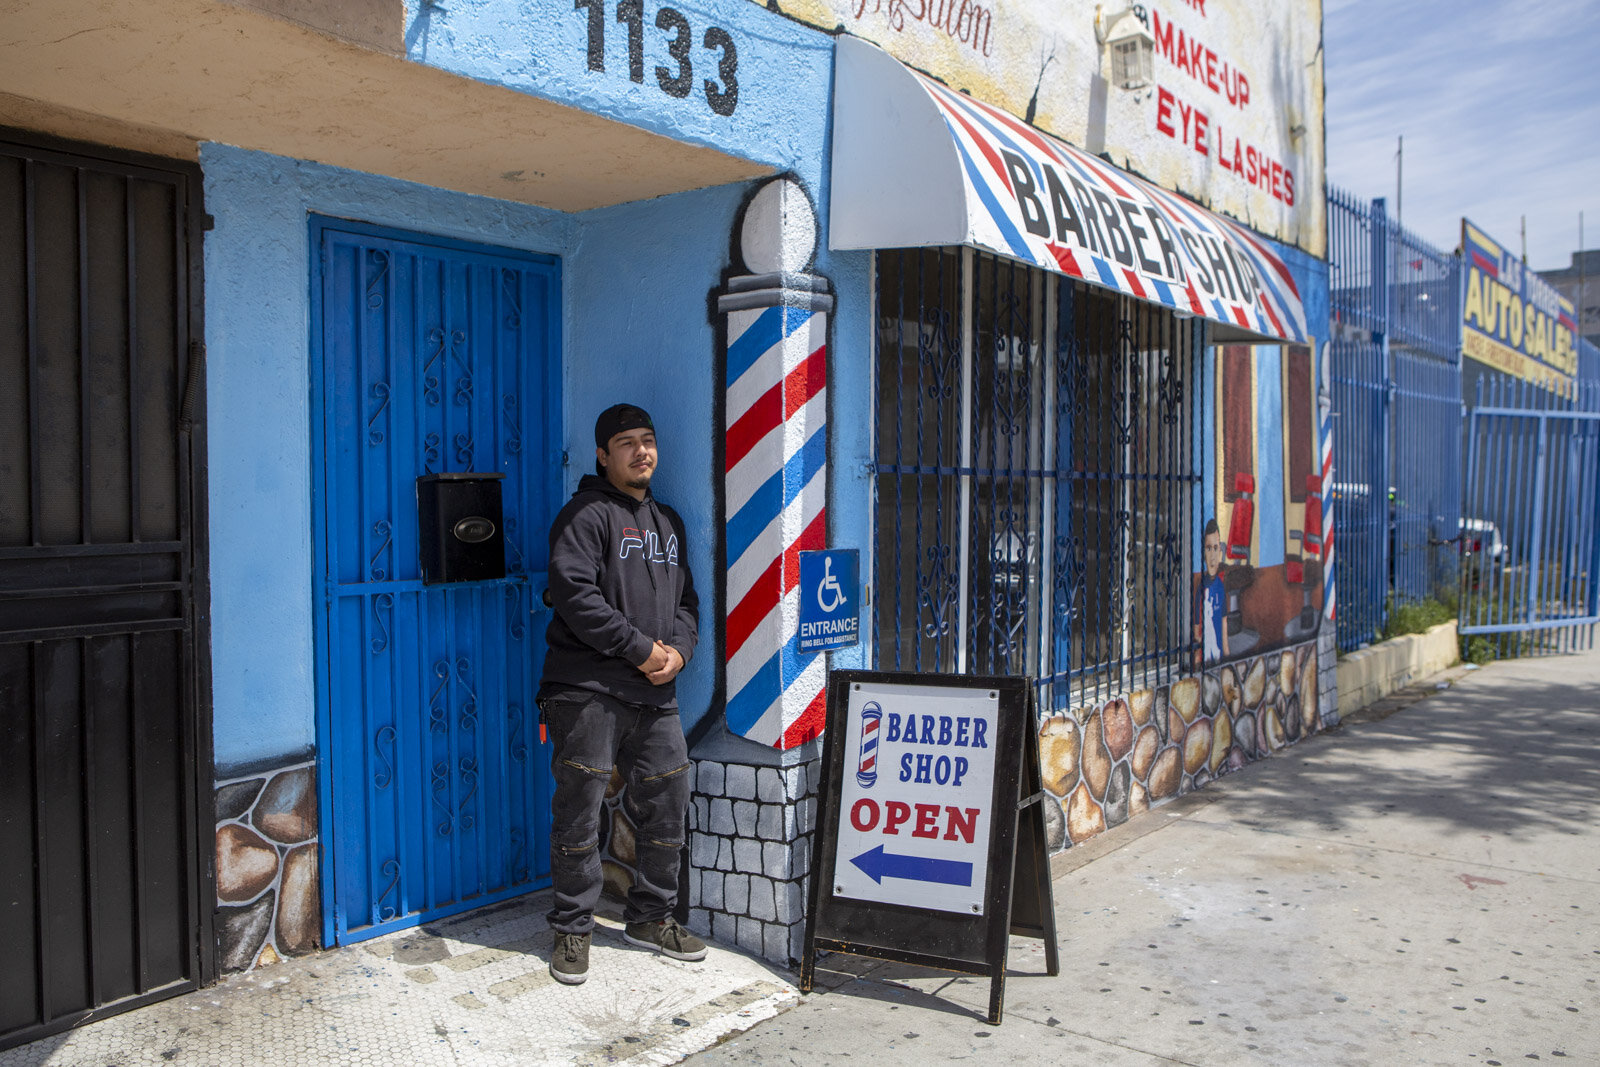 Daniel Sanchez owner of Giann’s barbershop in the predominantly Latinx community of Florence, where very few businesses got PPP loans for Reveal